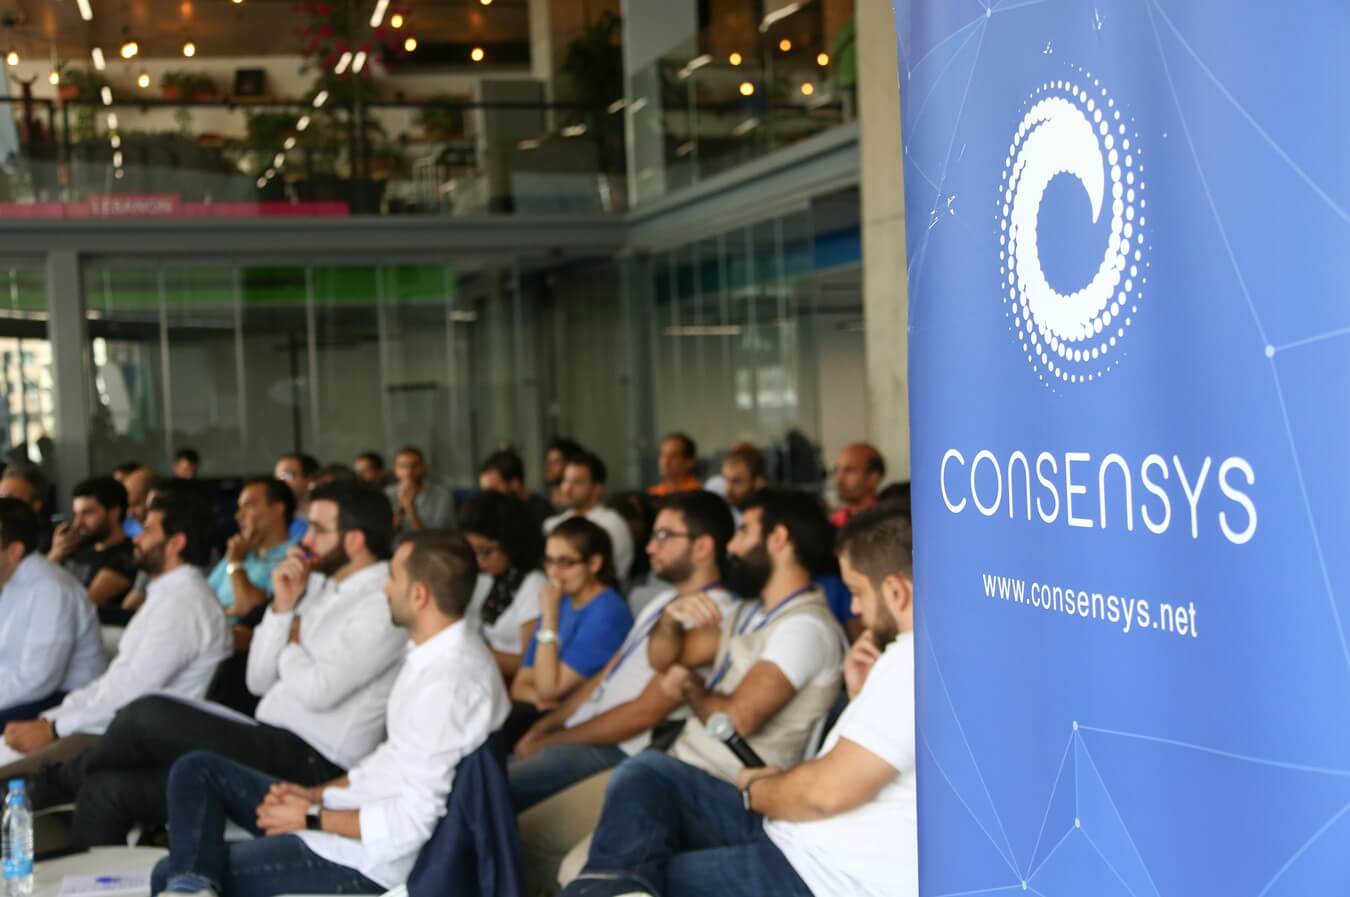 About consensys